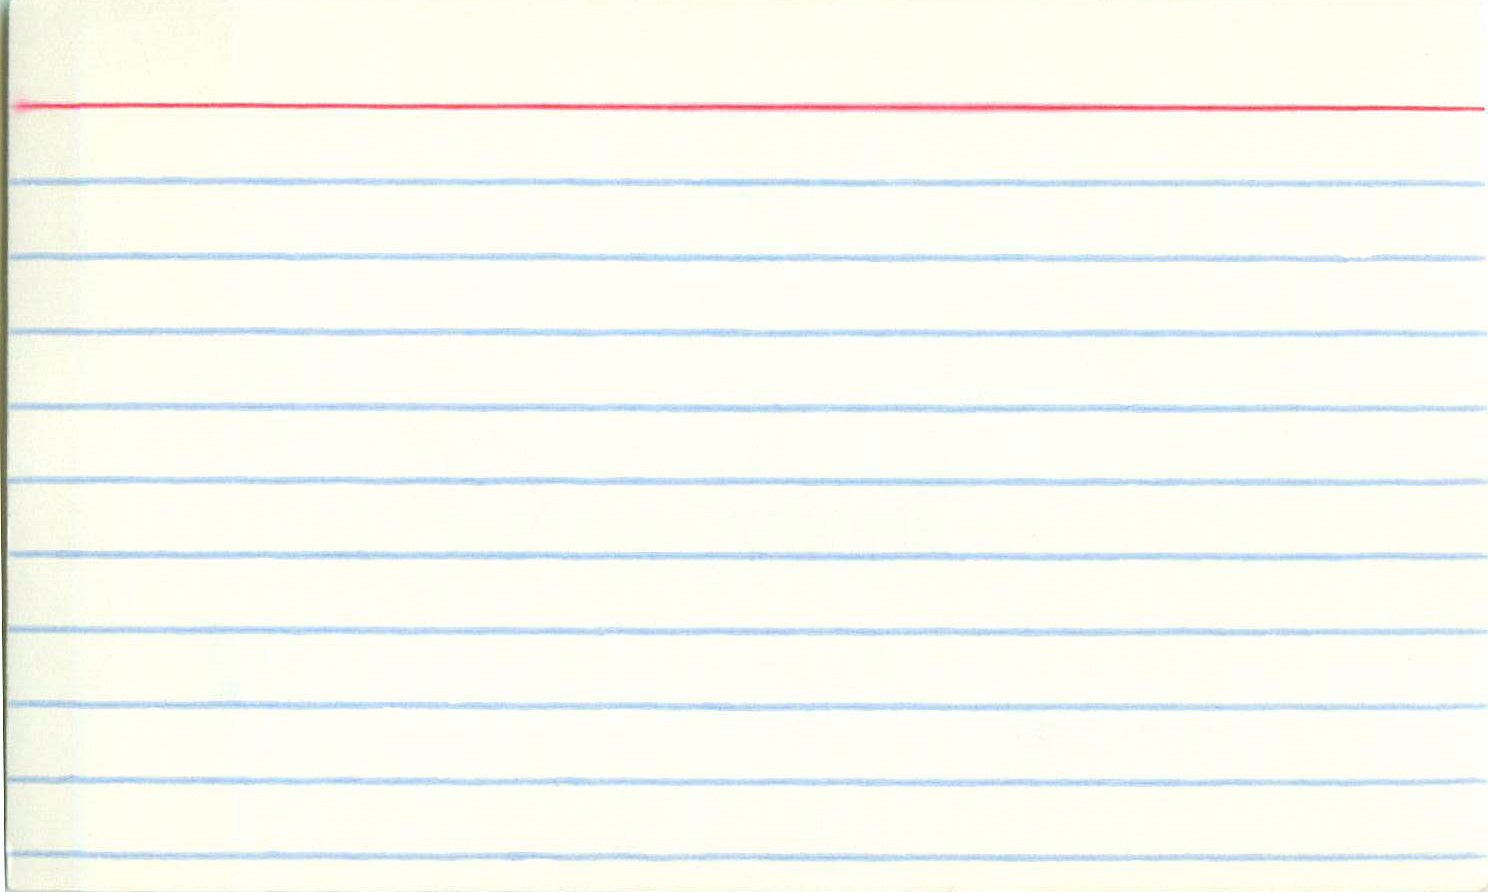 Blank index card! - StockPholio.com  Free Stock Photos Within Index Card Template For Word